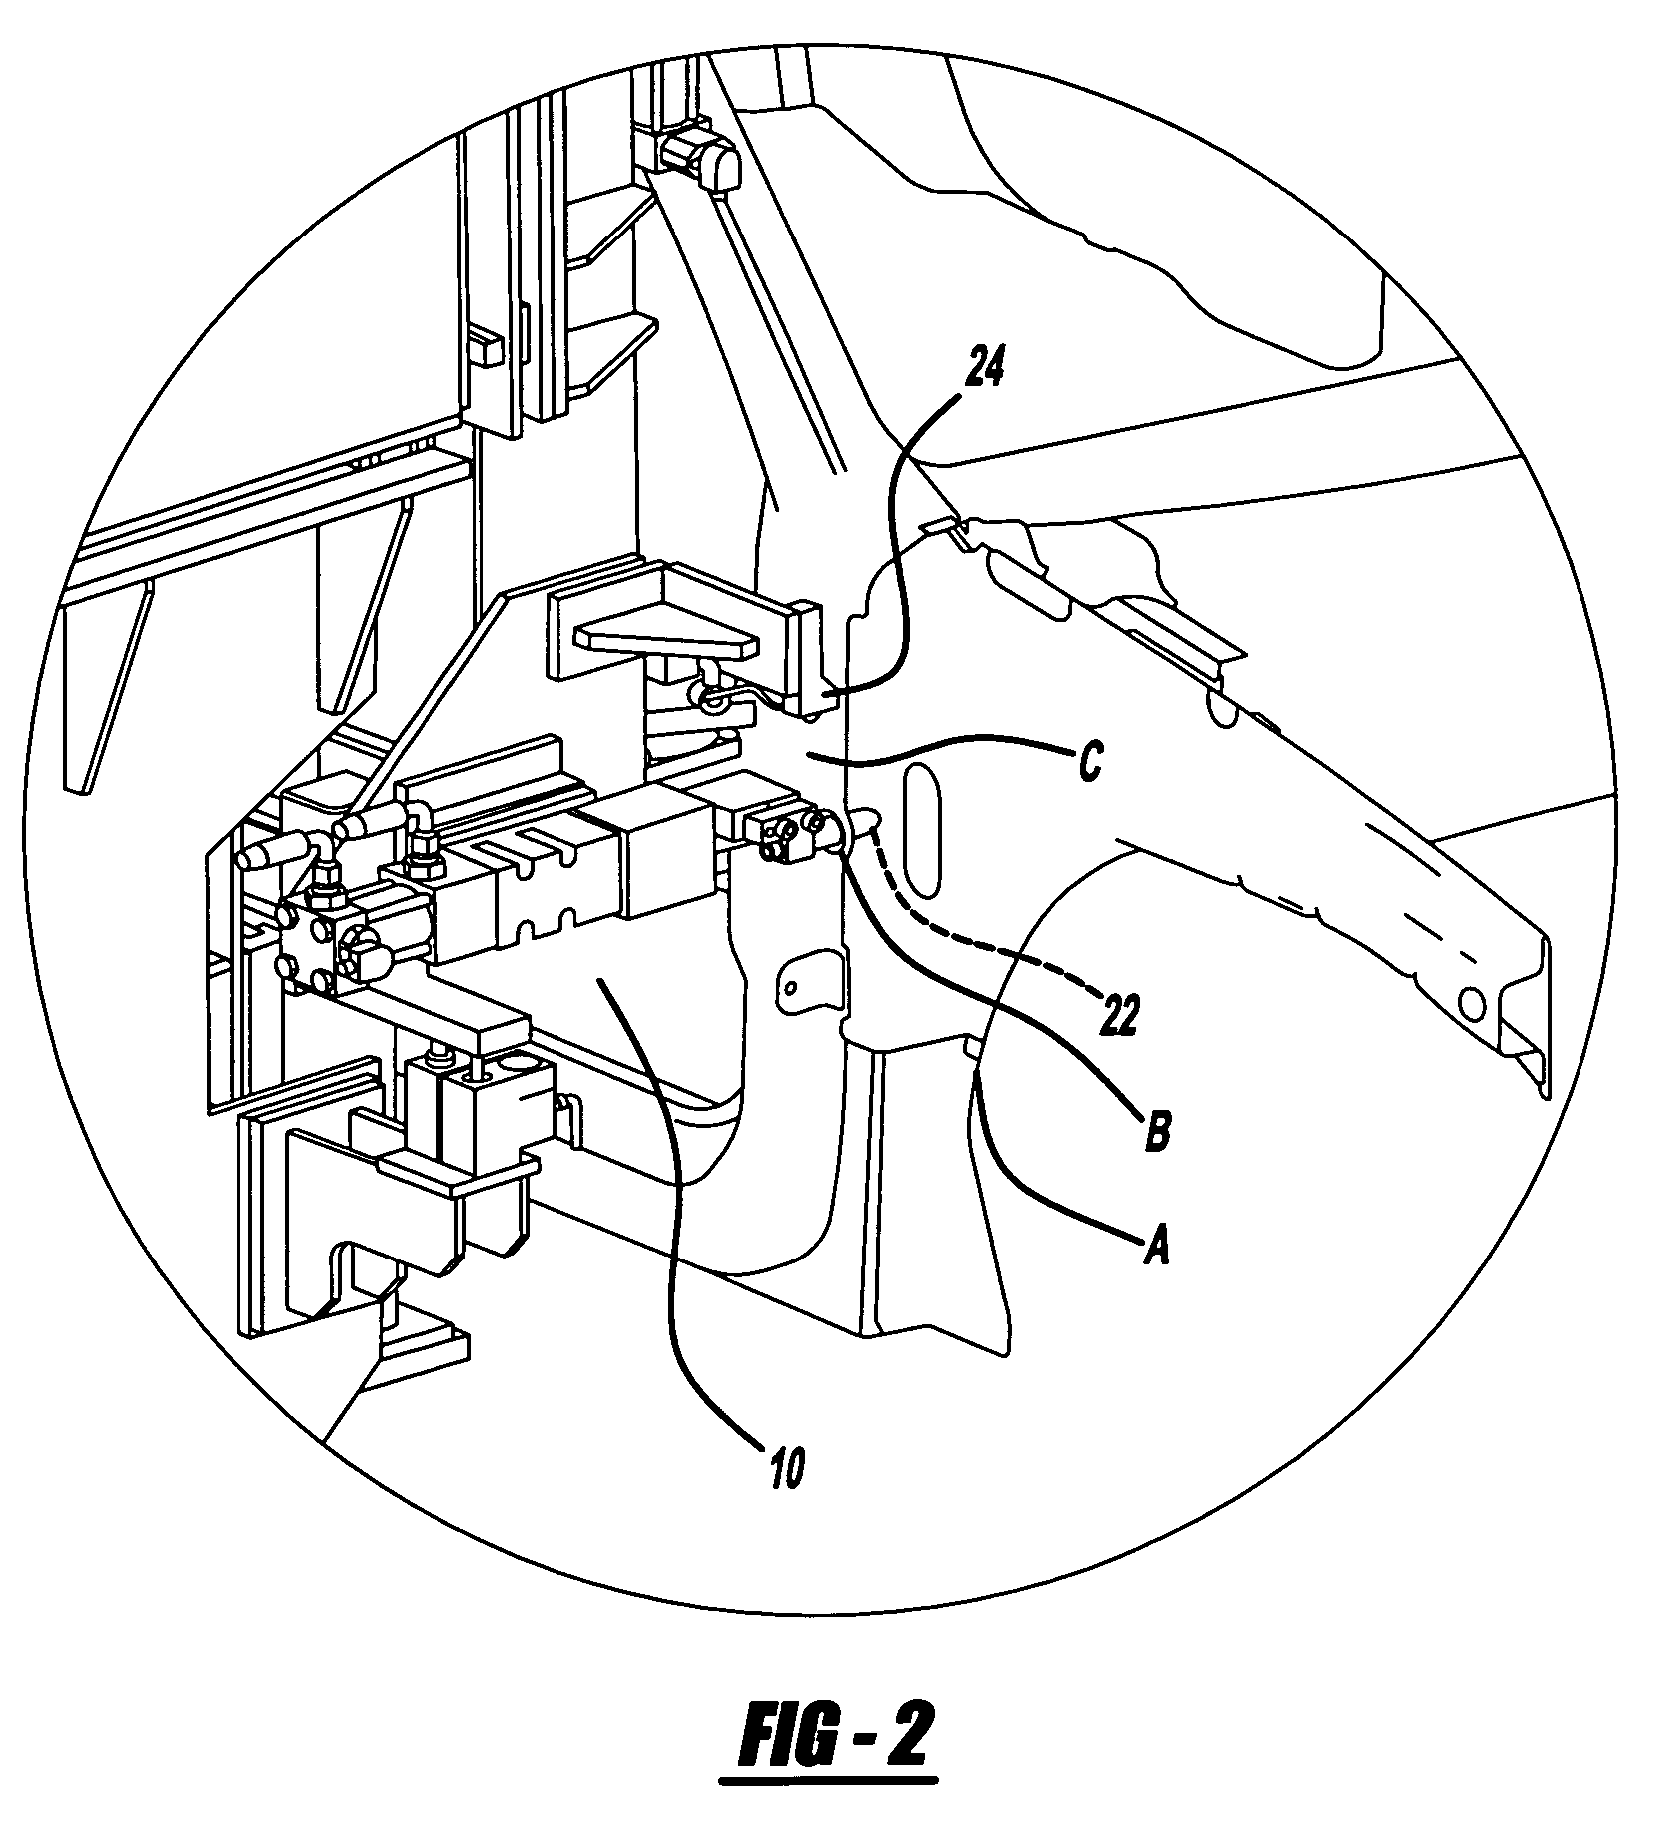 Method and apparatus for assembling exterior automotive vehicle body components onto an automotive vehicle body